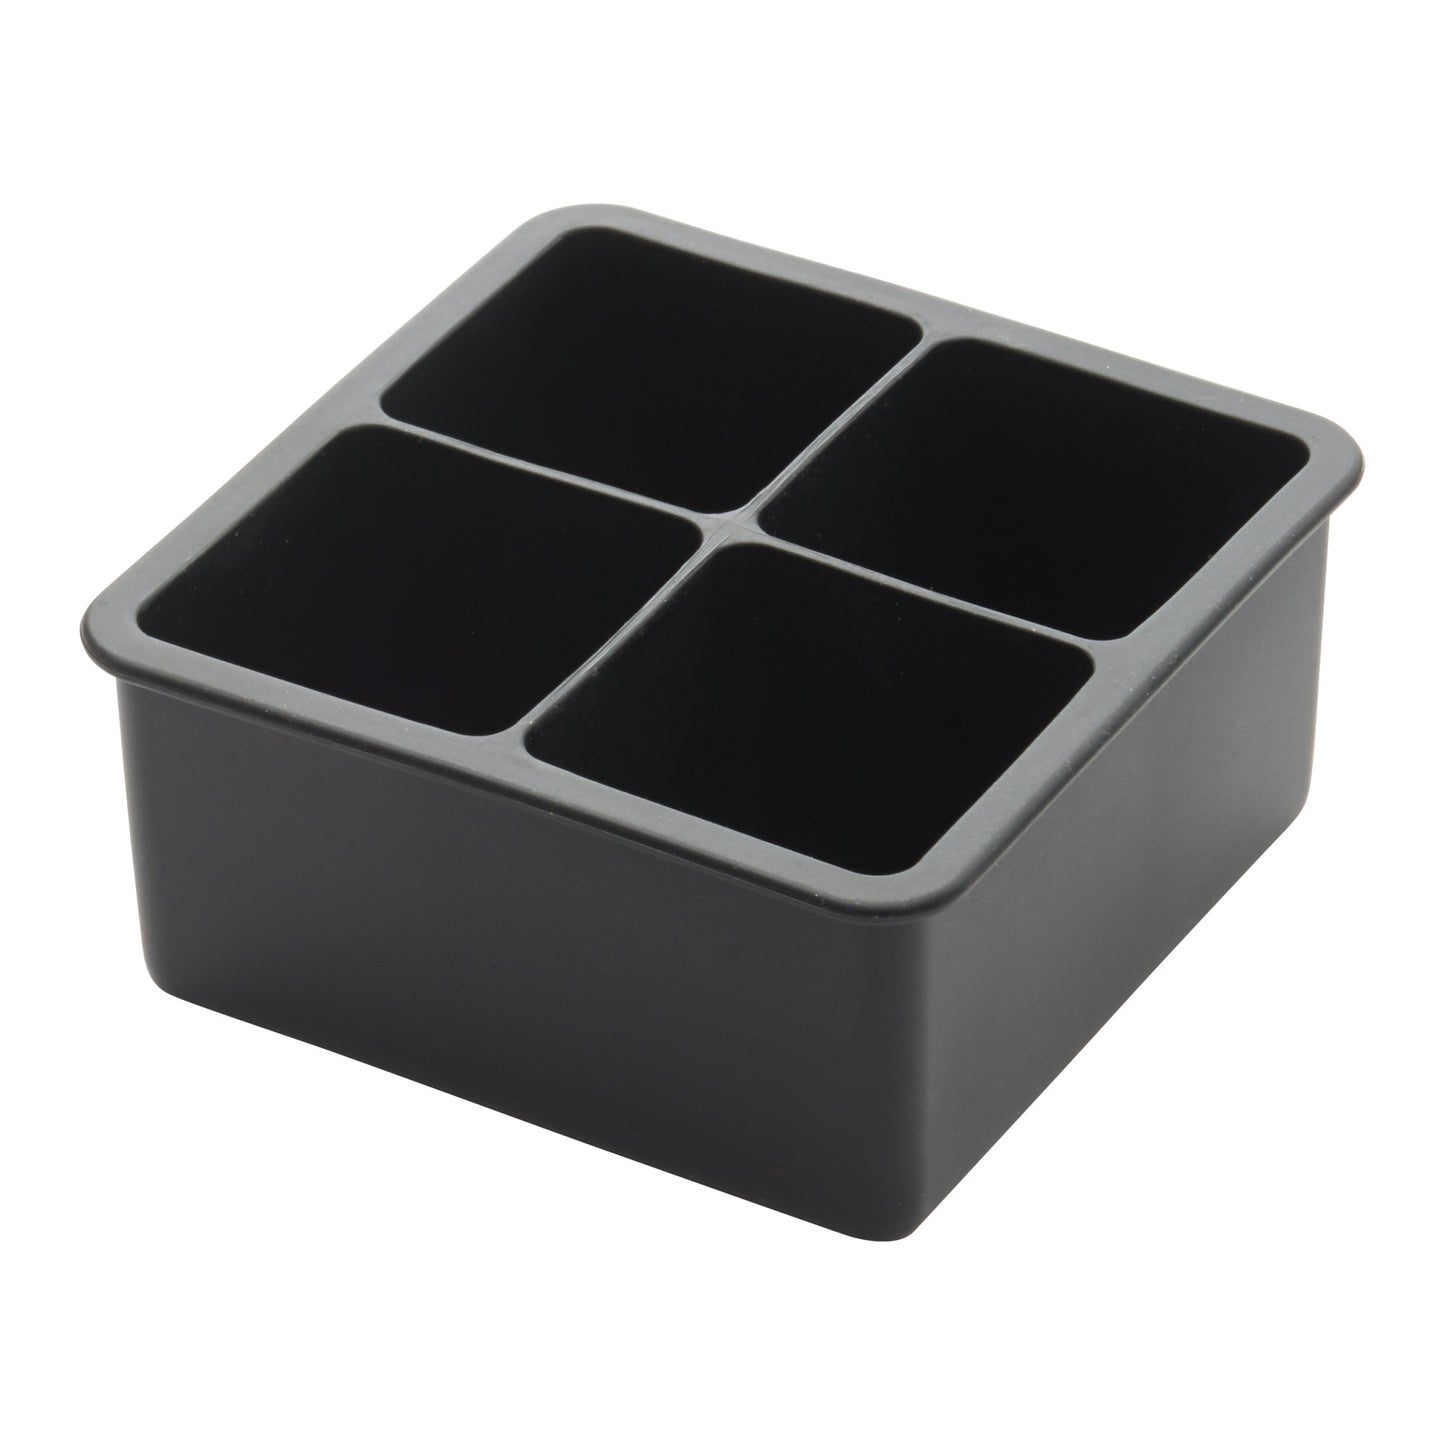 ICCT-4R - Ice cube tray, 4 compartments